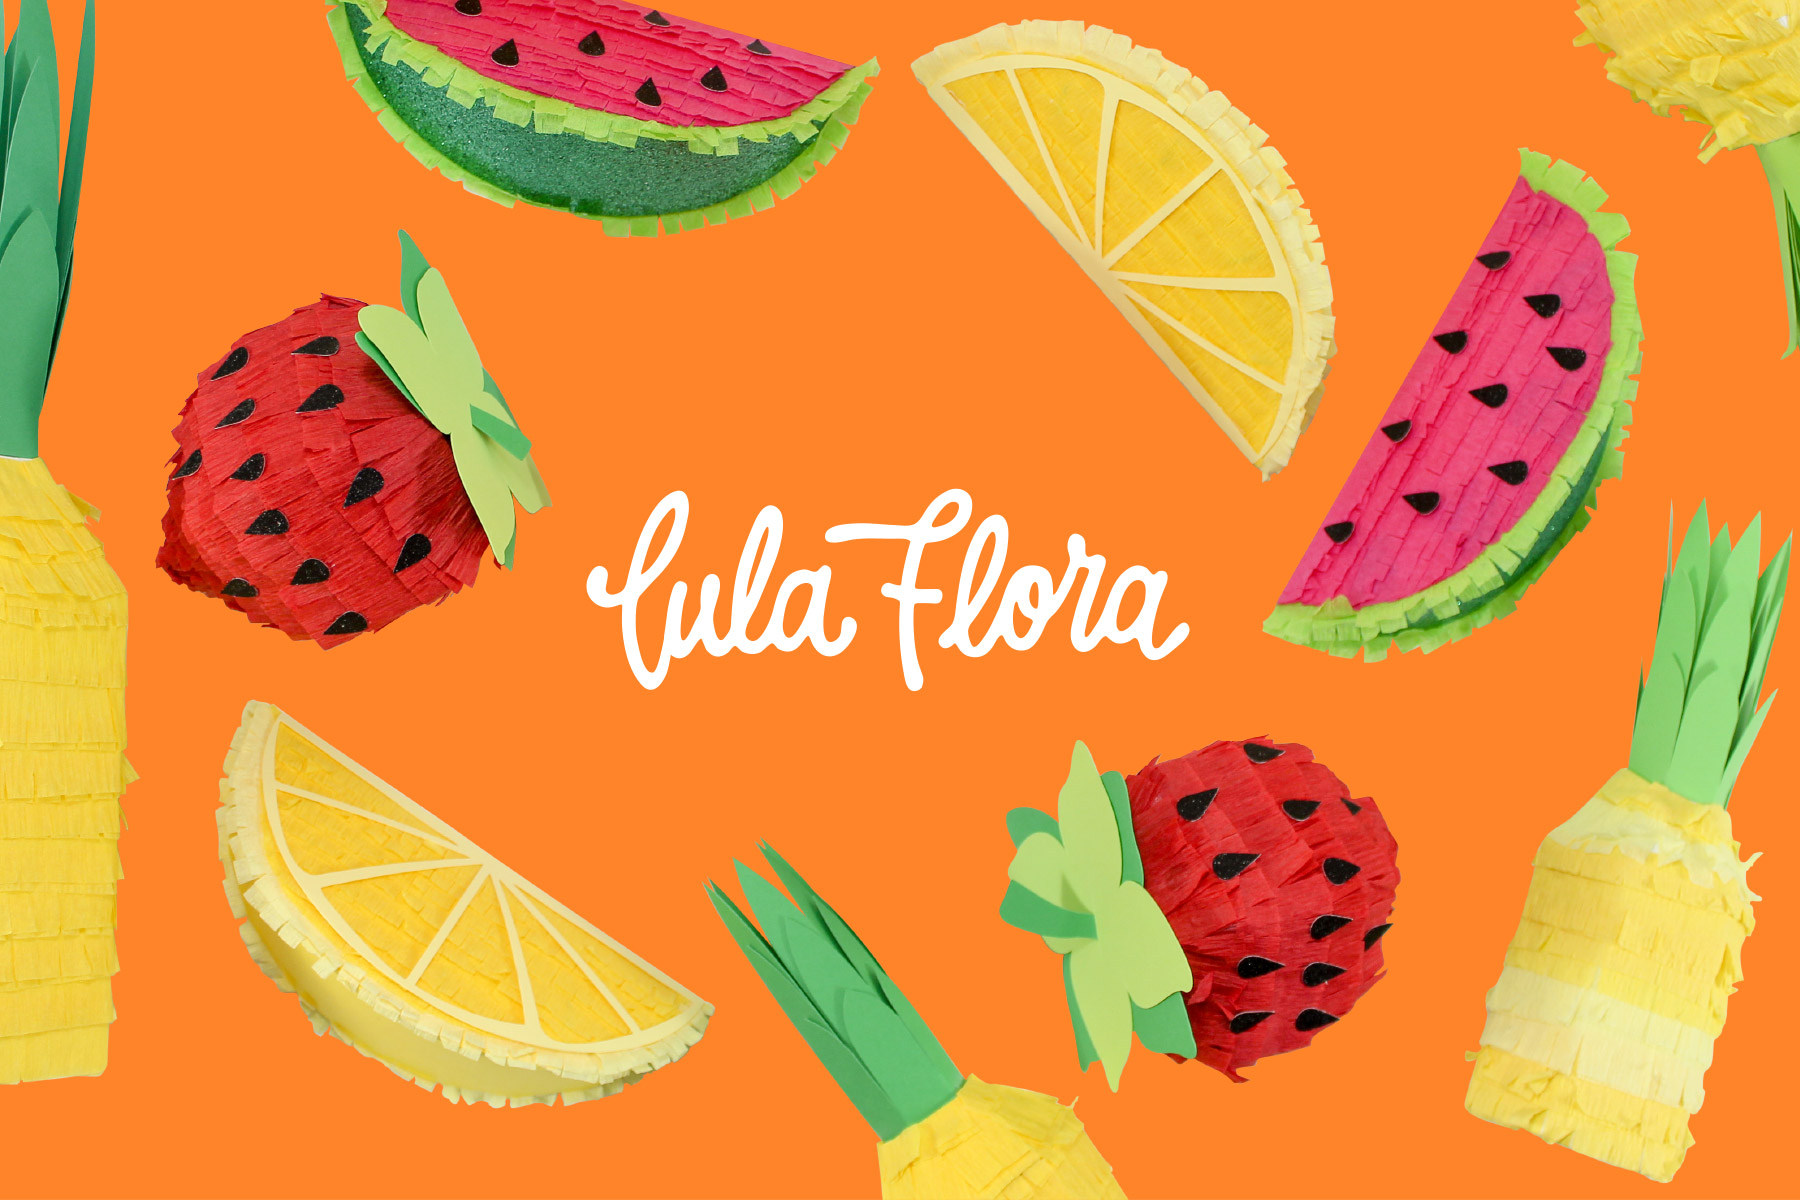 Lula Flora logo in the middle of a variety of miniature piñatas shape like fruit